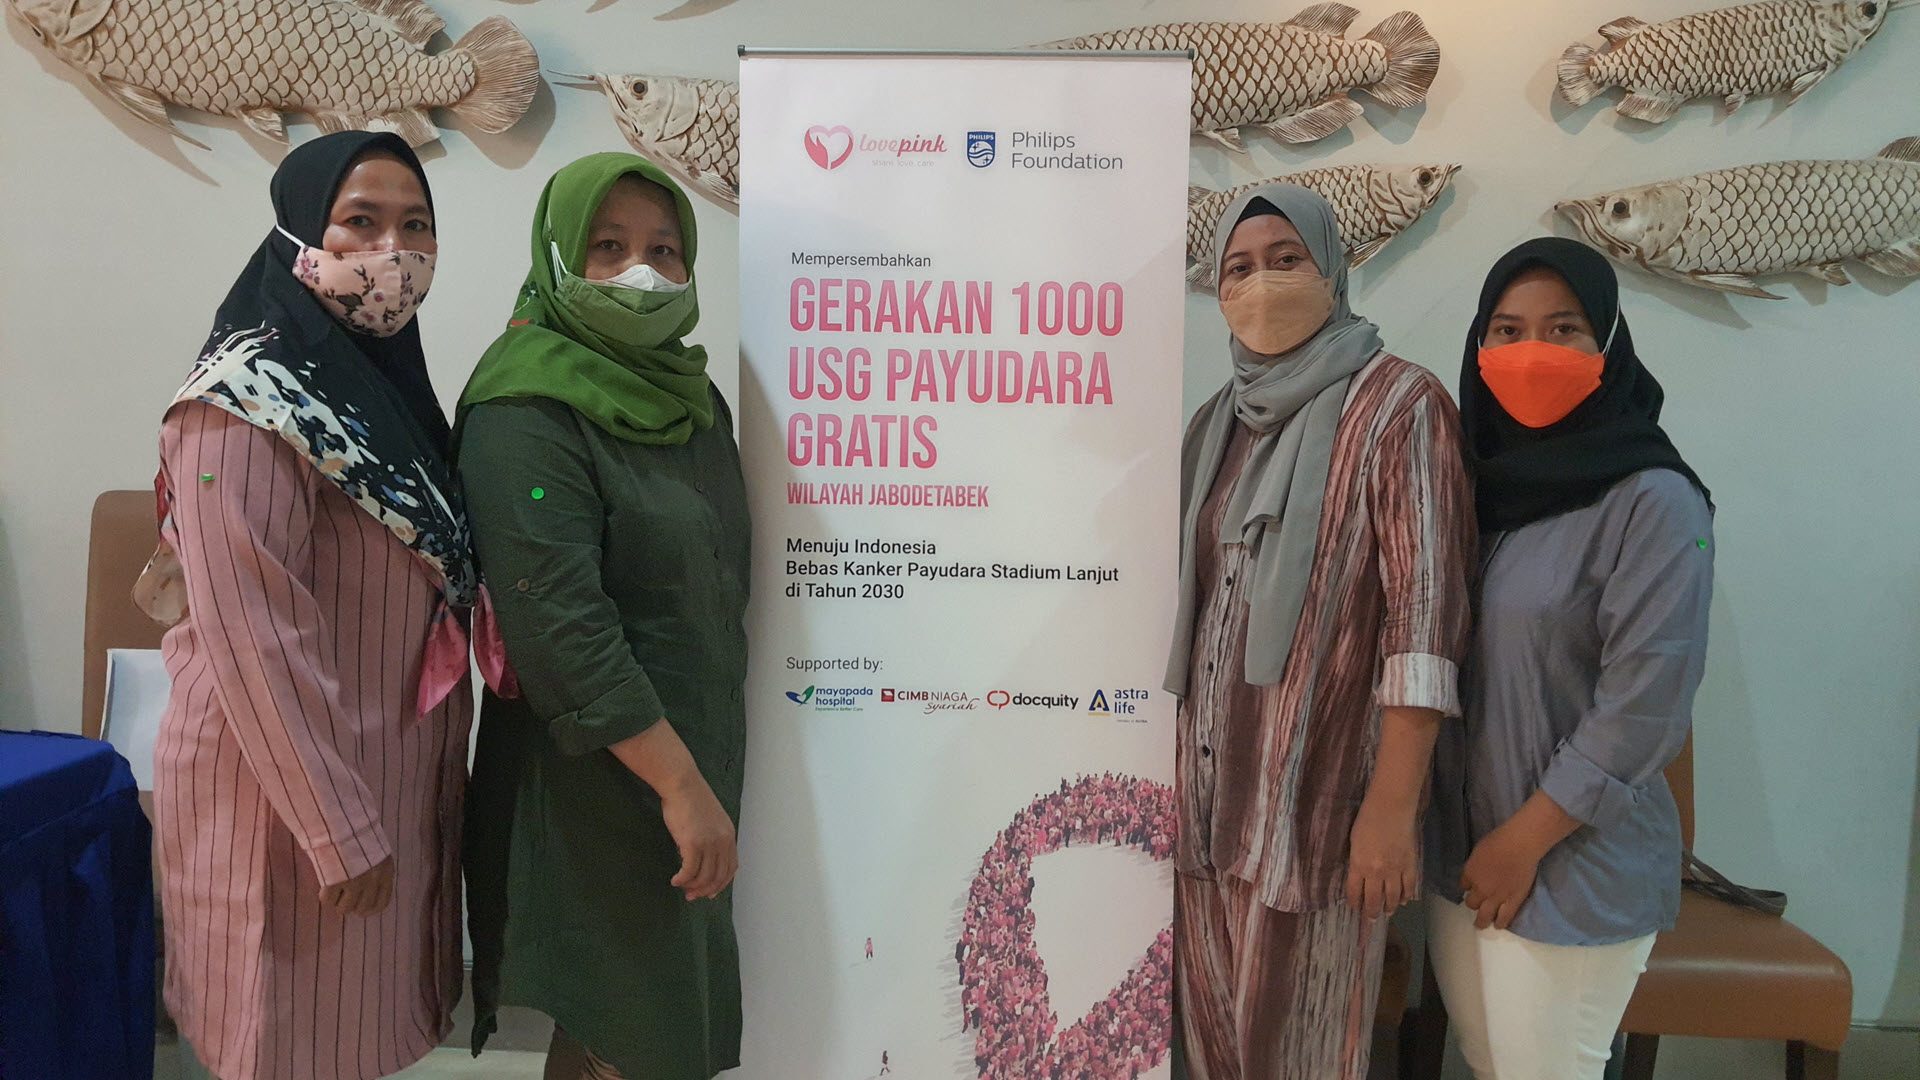 Calling for early detection to manage breast cancer in Indonesia